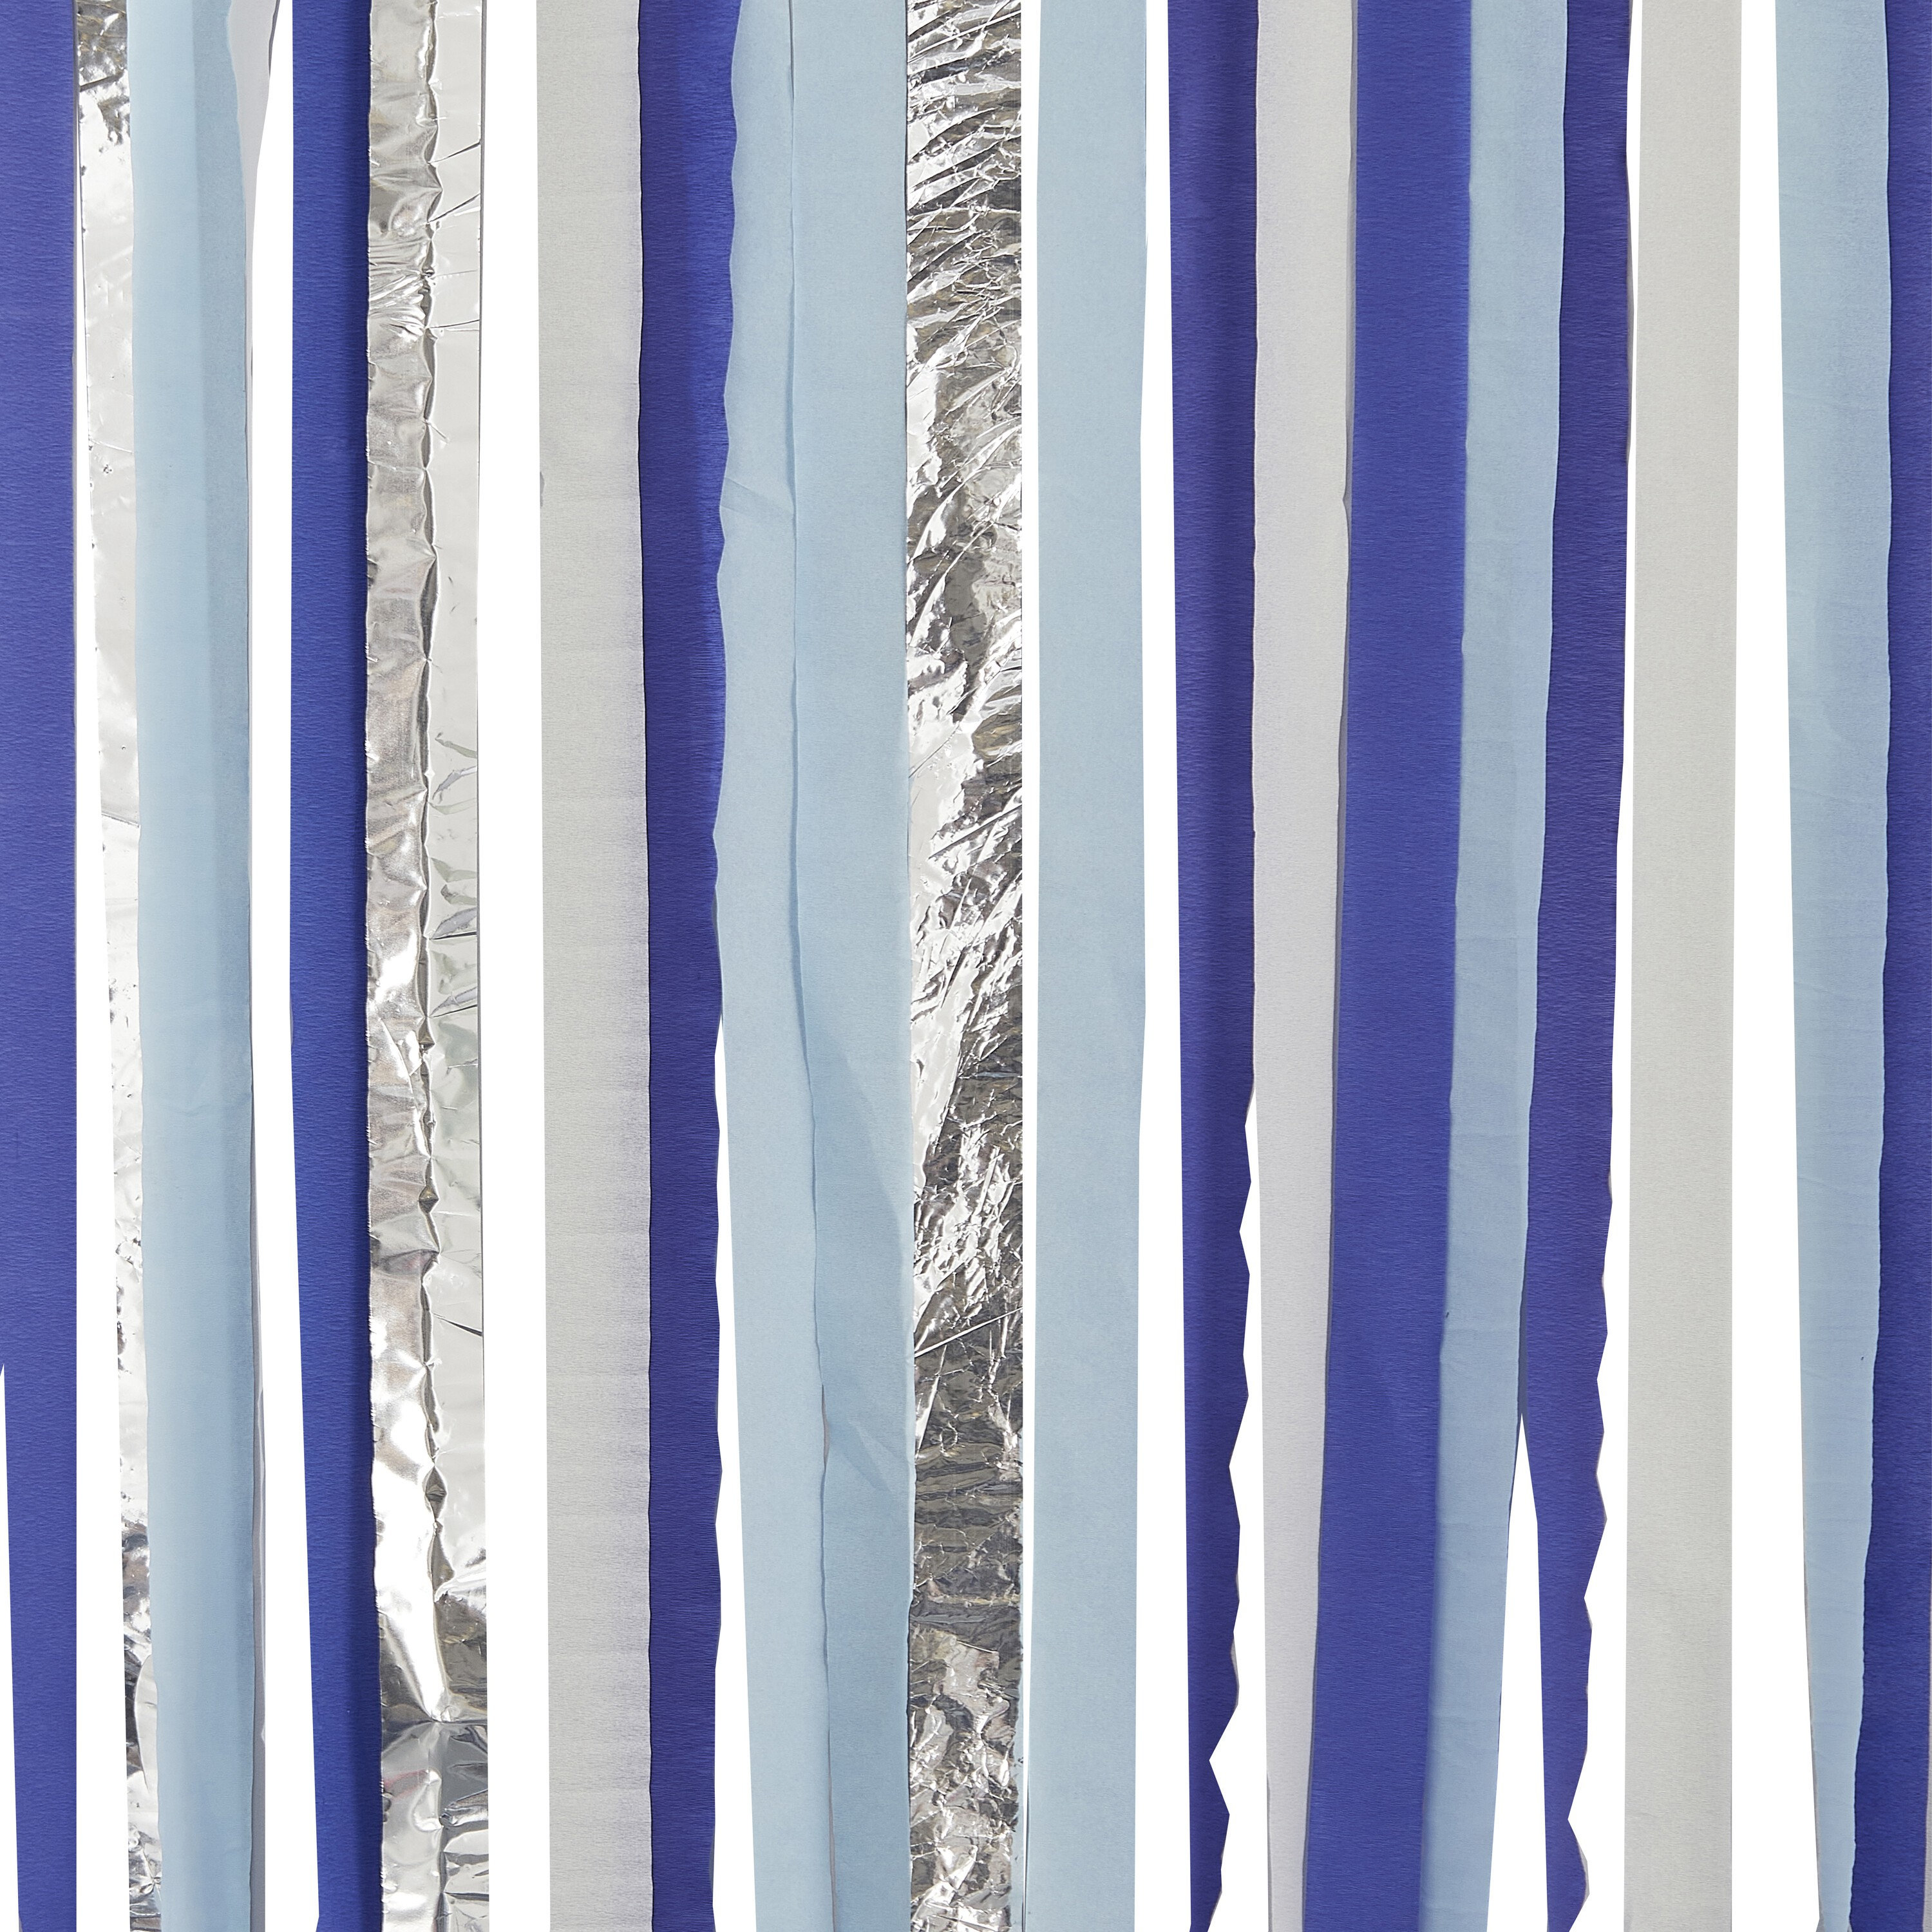 Colorful Shiny Streamers Background Blue Silver Stock Photo 1200242620